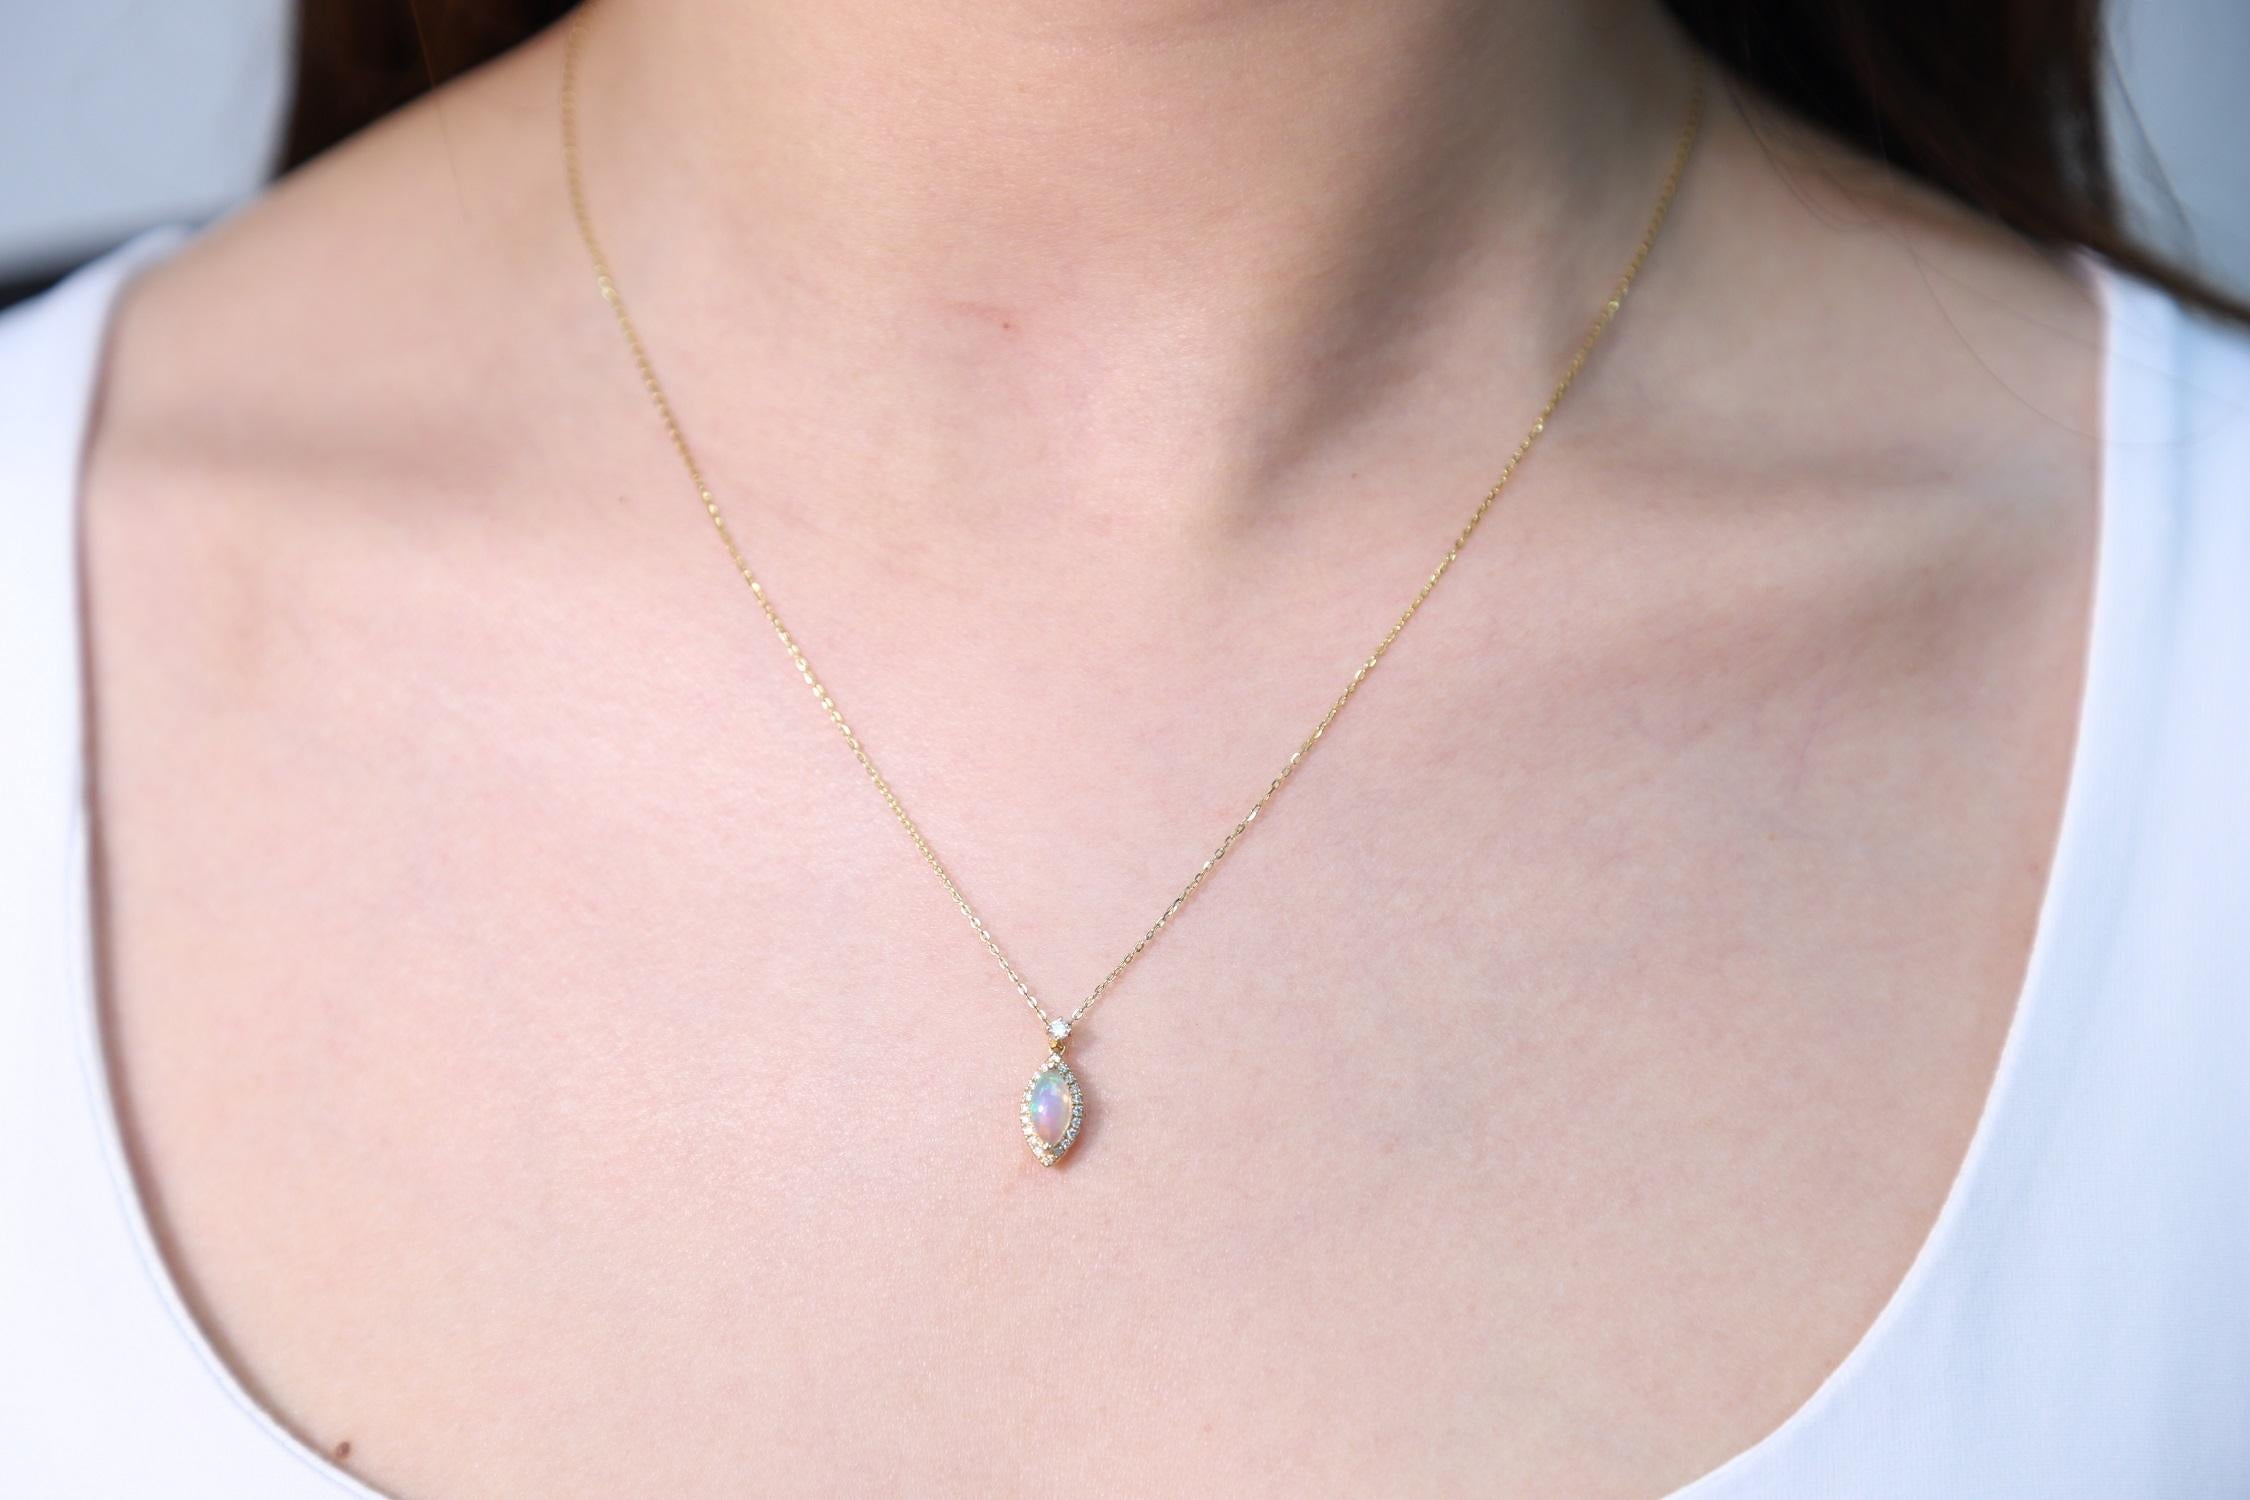 Decorate yourself in elegance with this Pendant is crafted from 10-karat Yellow Gold by Gin & Grace Pendant. This Pendant is made up of 4X8 Marquise-cut Prong setting Natural Opal (1 Pcs) 0.40 Carat and Round-Cut Prong setting Natural White Diamond